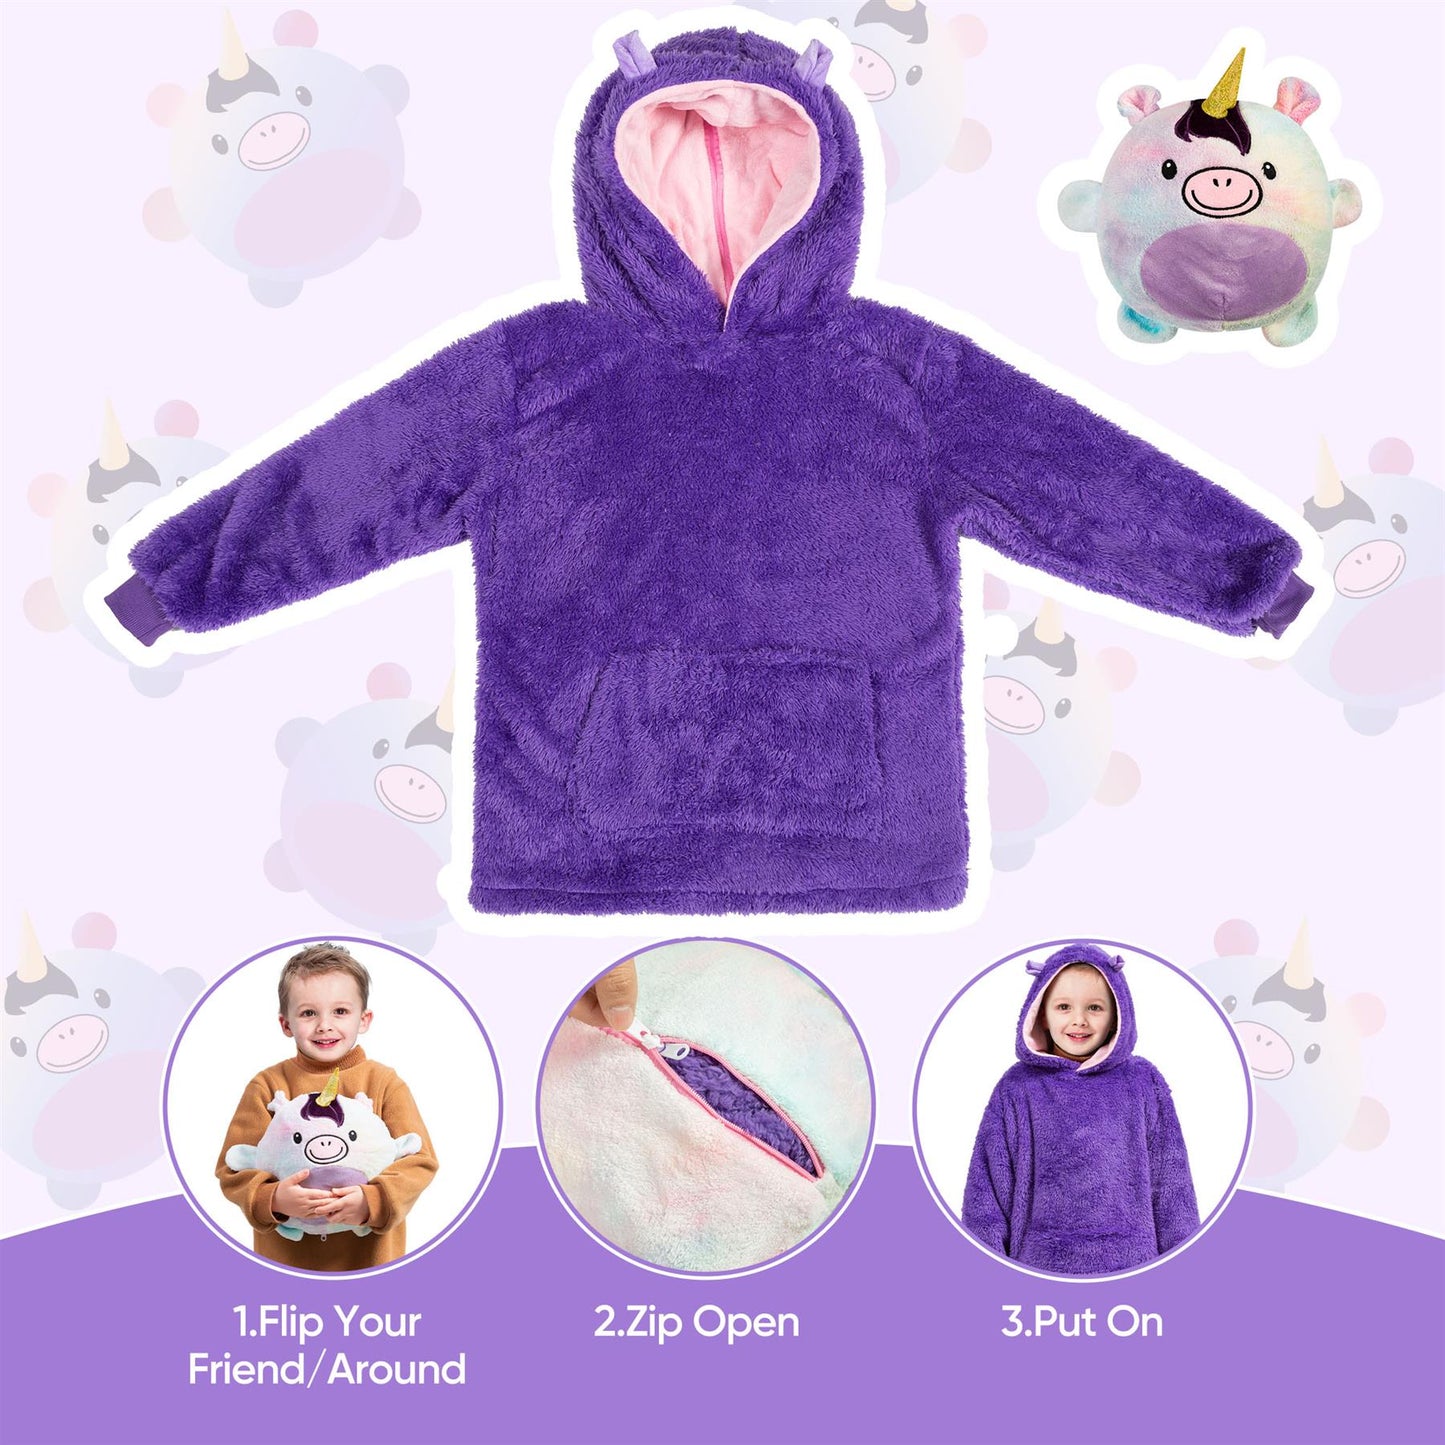 Stay Cozy and Cute with a Plush Animal Hoodie